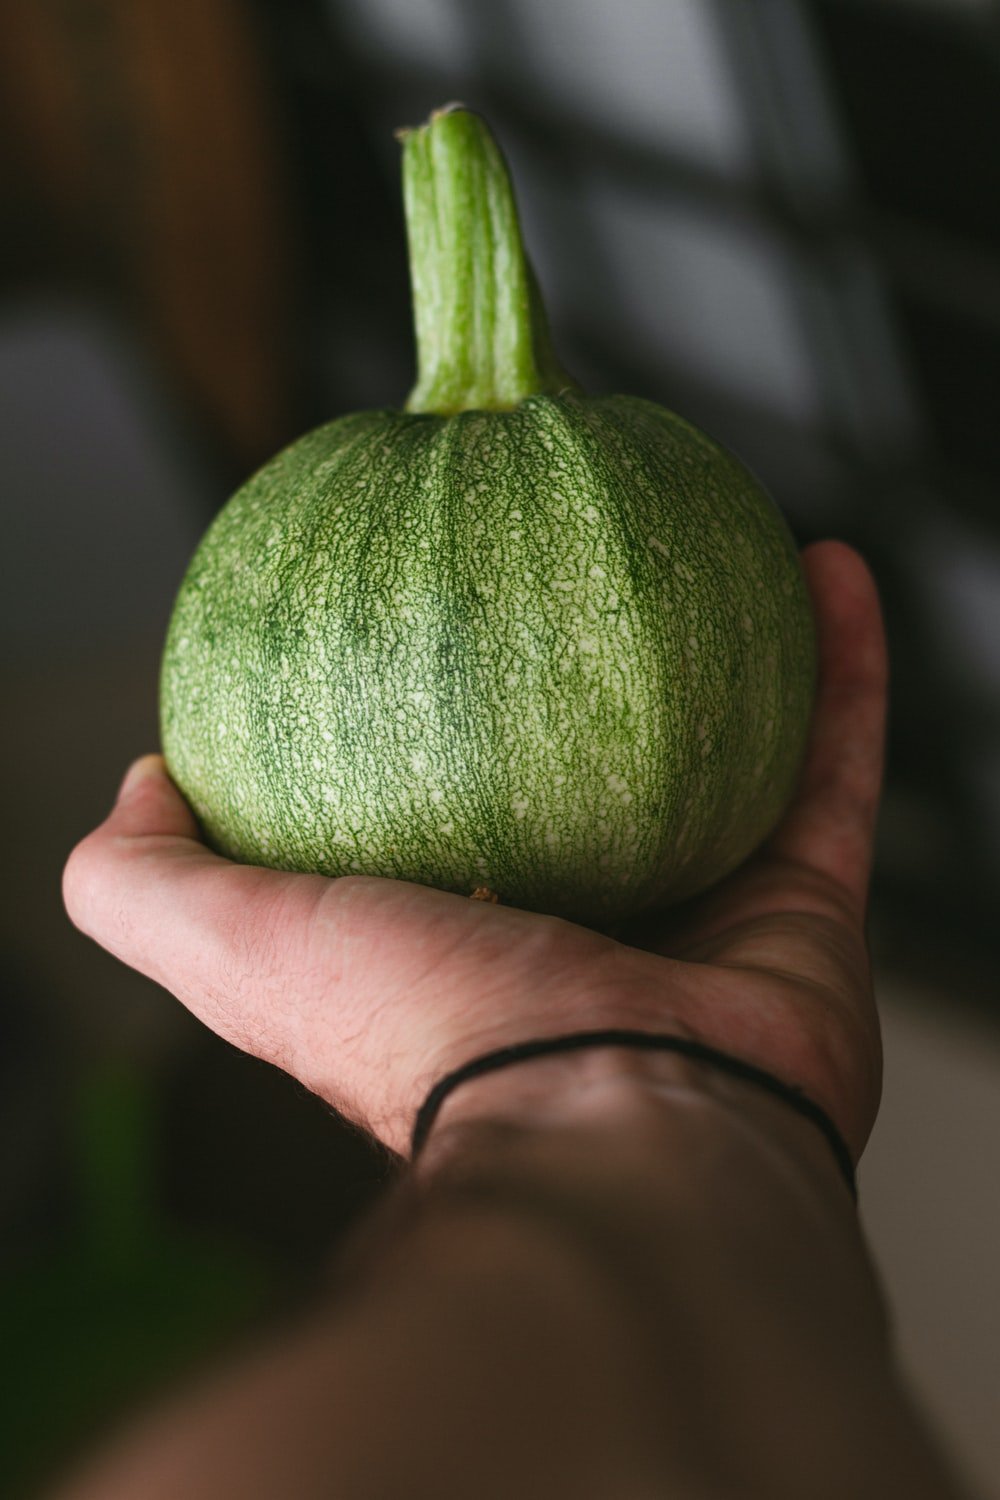 Summer Squash Picture. Download Free Image